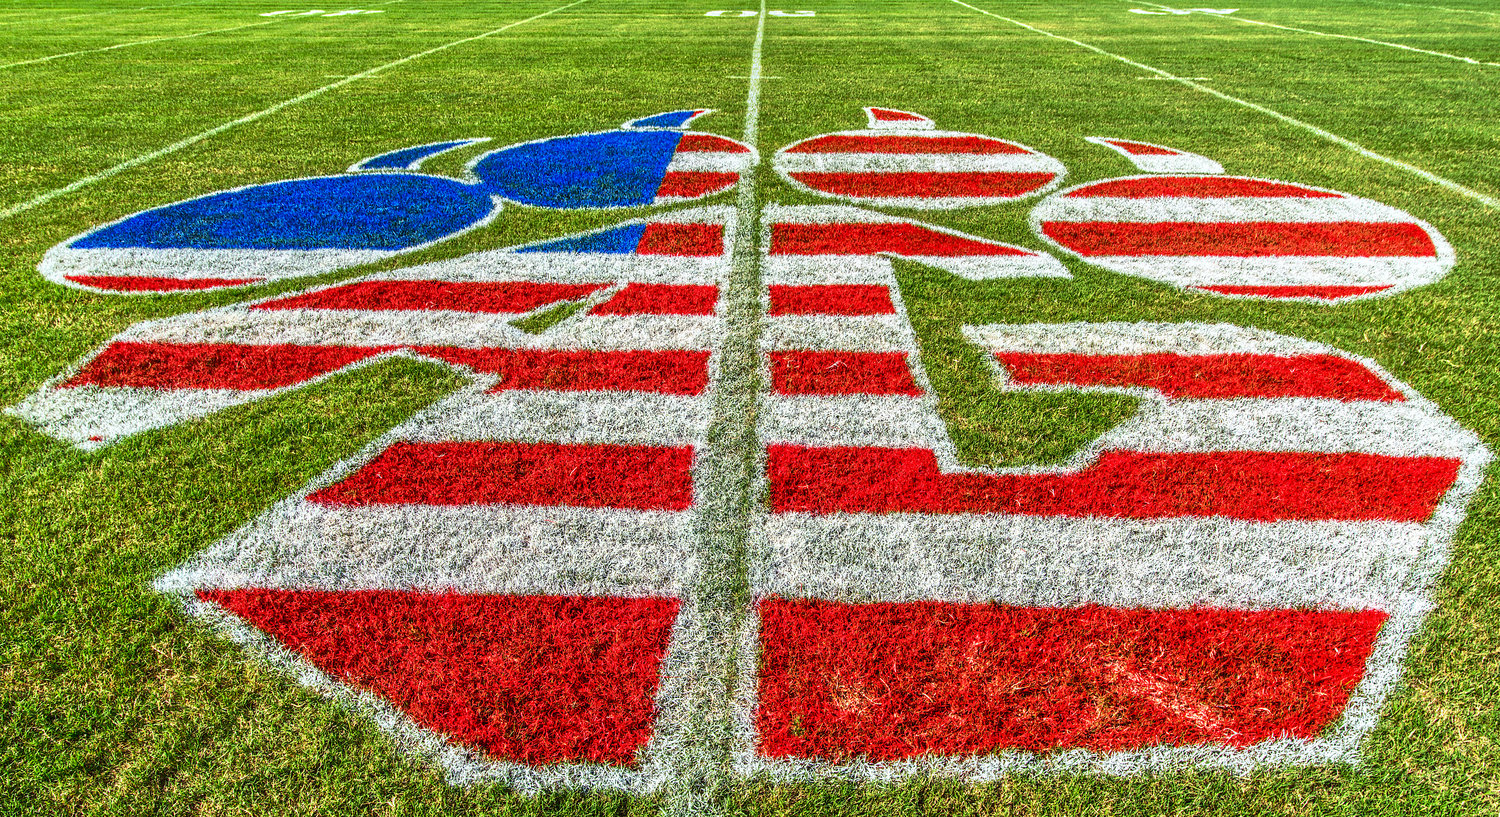 Alba-Golden adopted a patriotic field logo for its game.